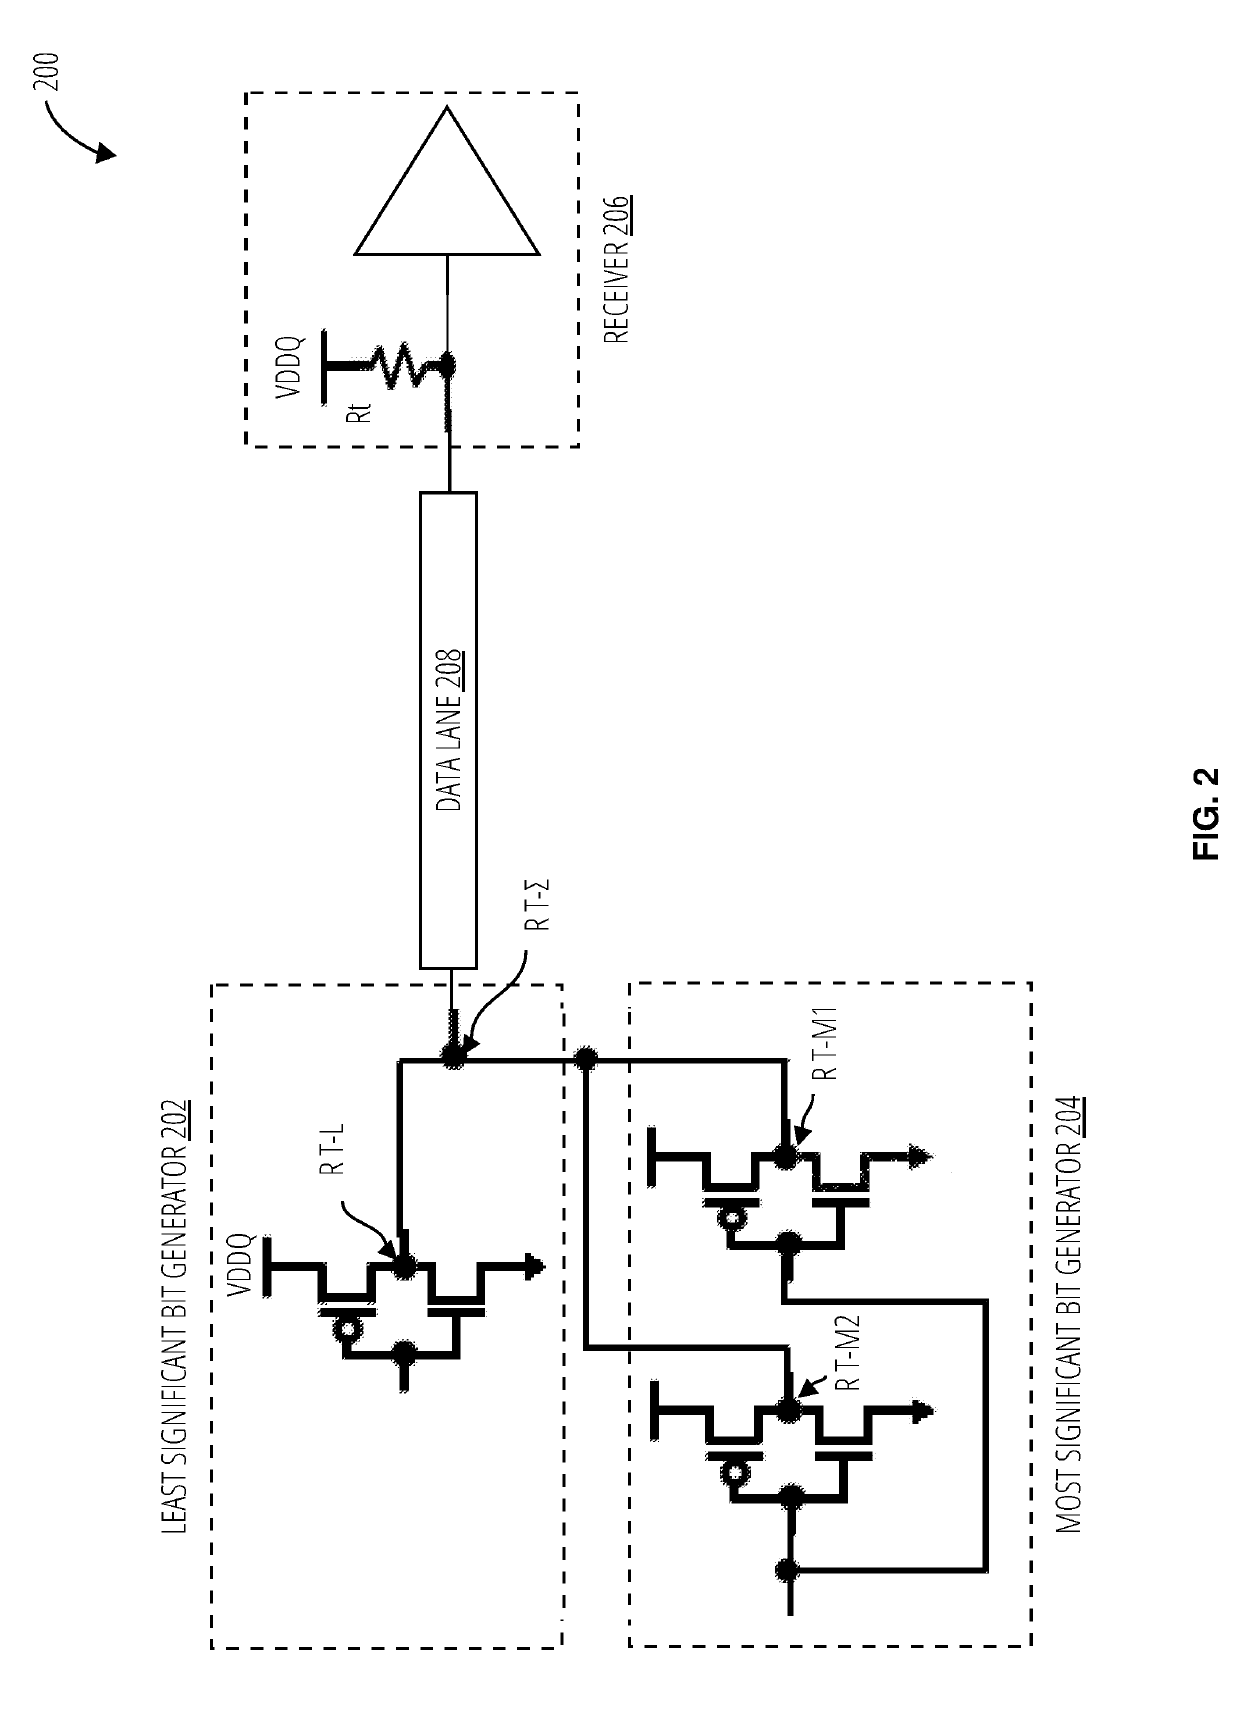 Data bus inversion (DBI) on pulse amplitude modulation (PAM) and reducing coupling and power noise on pam-4 I/O